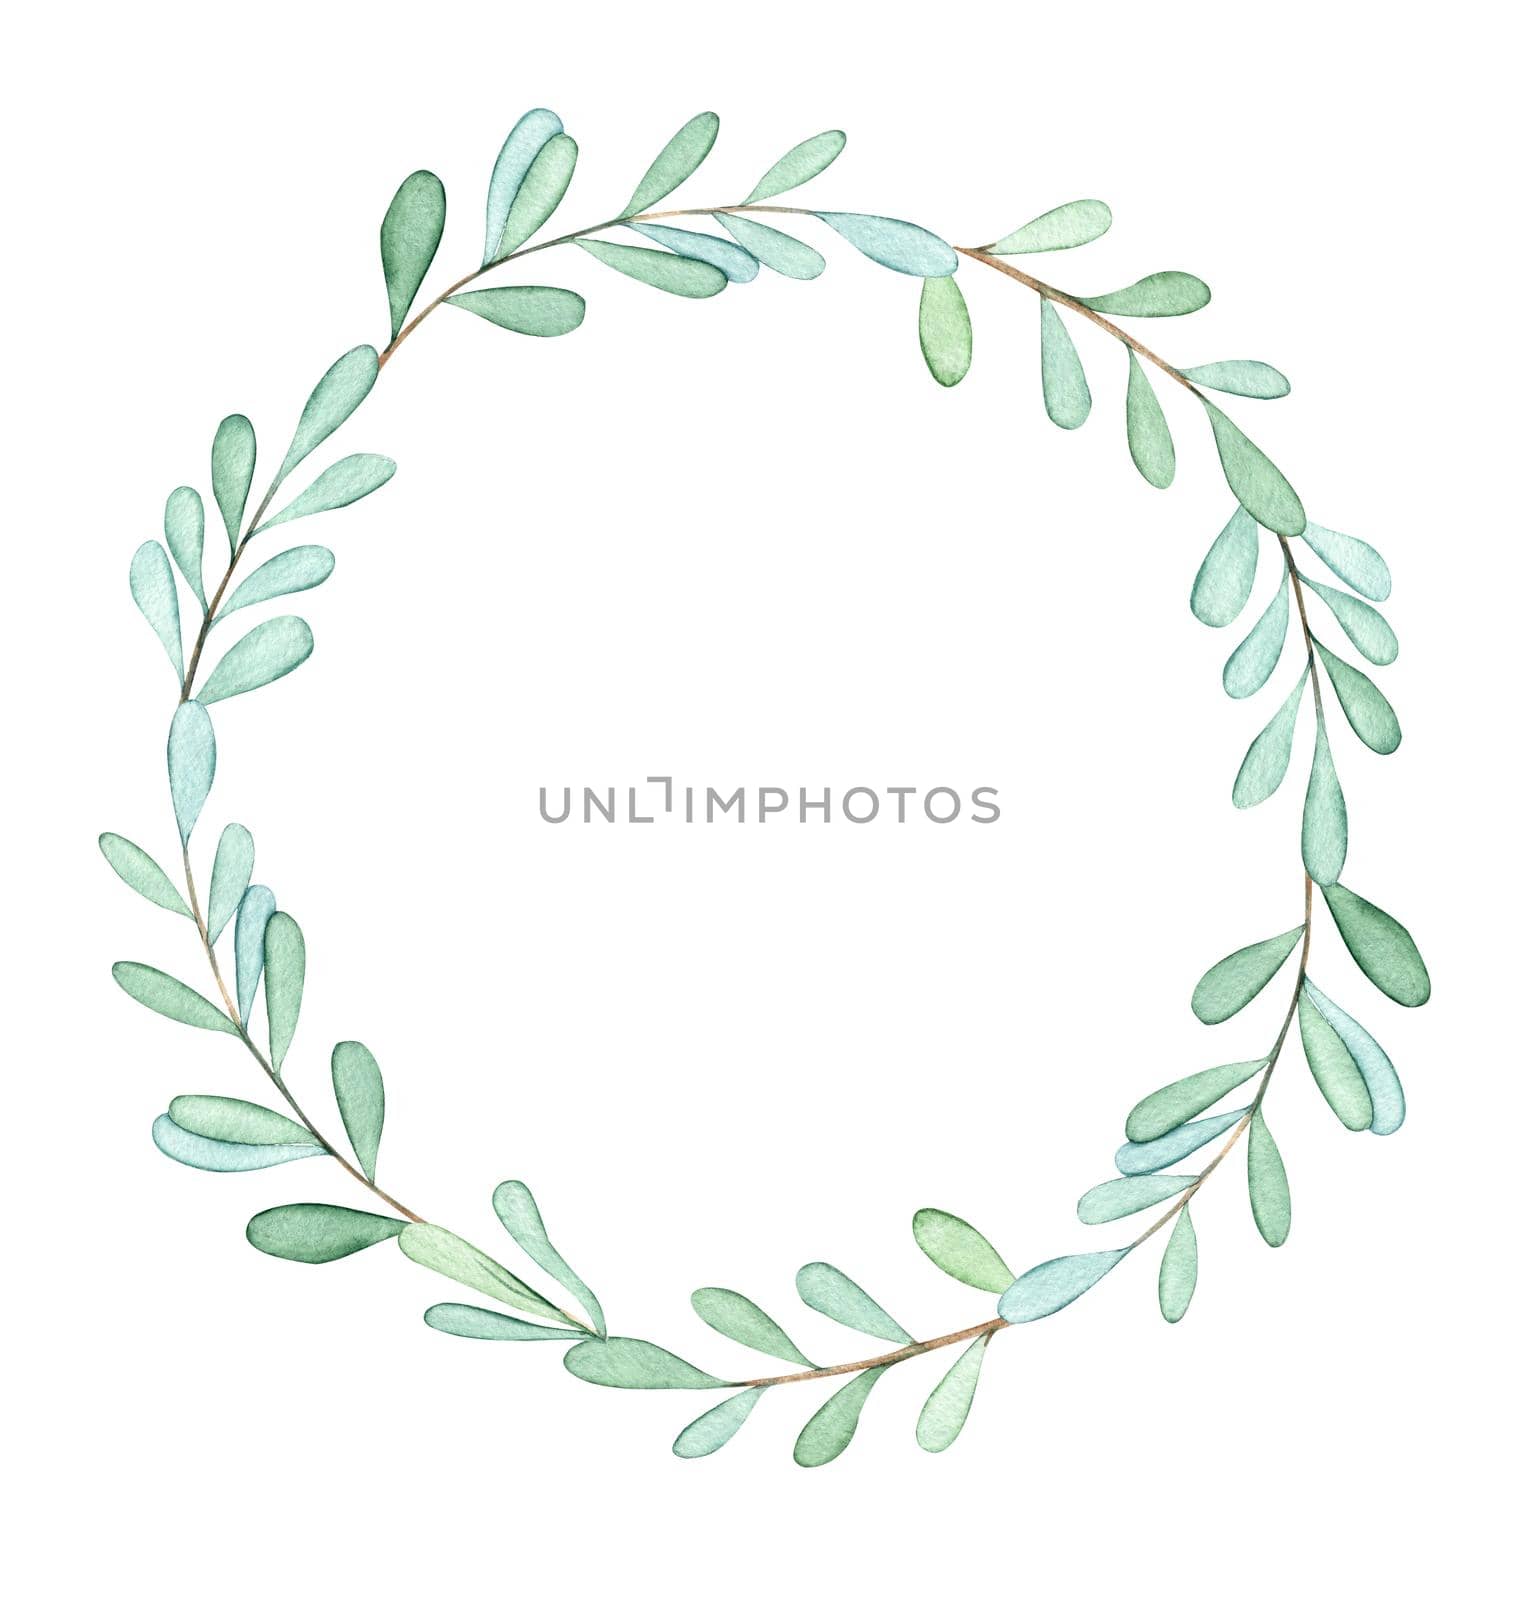 Watercolor mistletoe wreath isolated on white background. Branch with leaves round border for wedding invitation, logo, cards, design